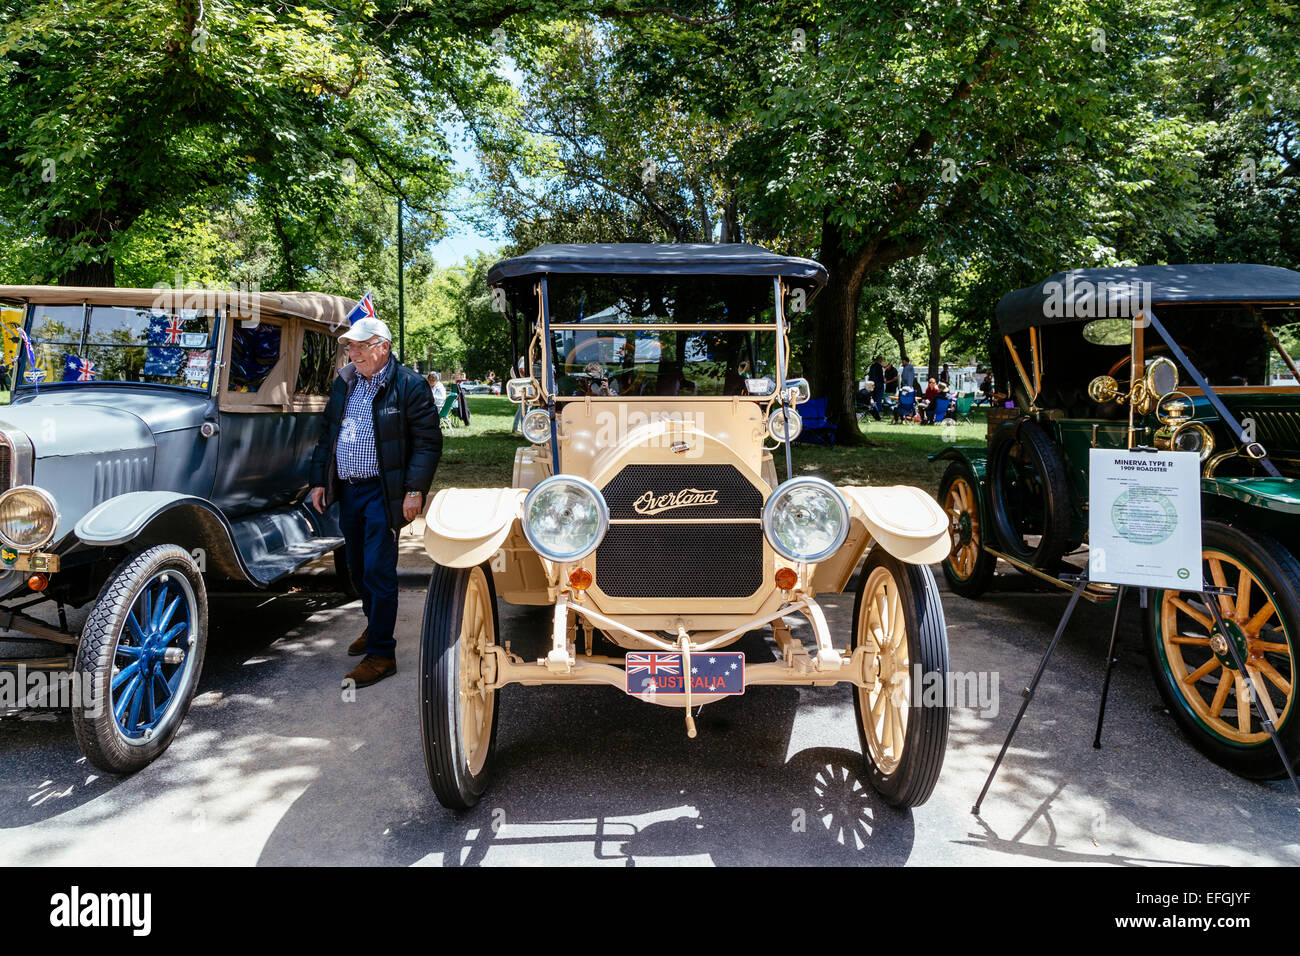 Classic cars on display, RACV Australia Day picnic and Federation Vehicle Display, Kings Domain, Melbourne, Victoria, Australia Stock Photo